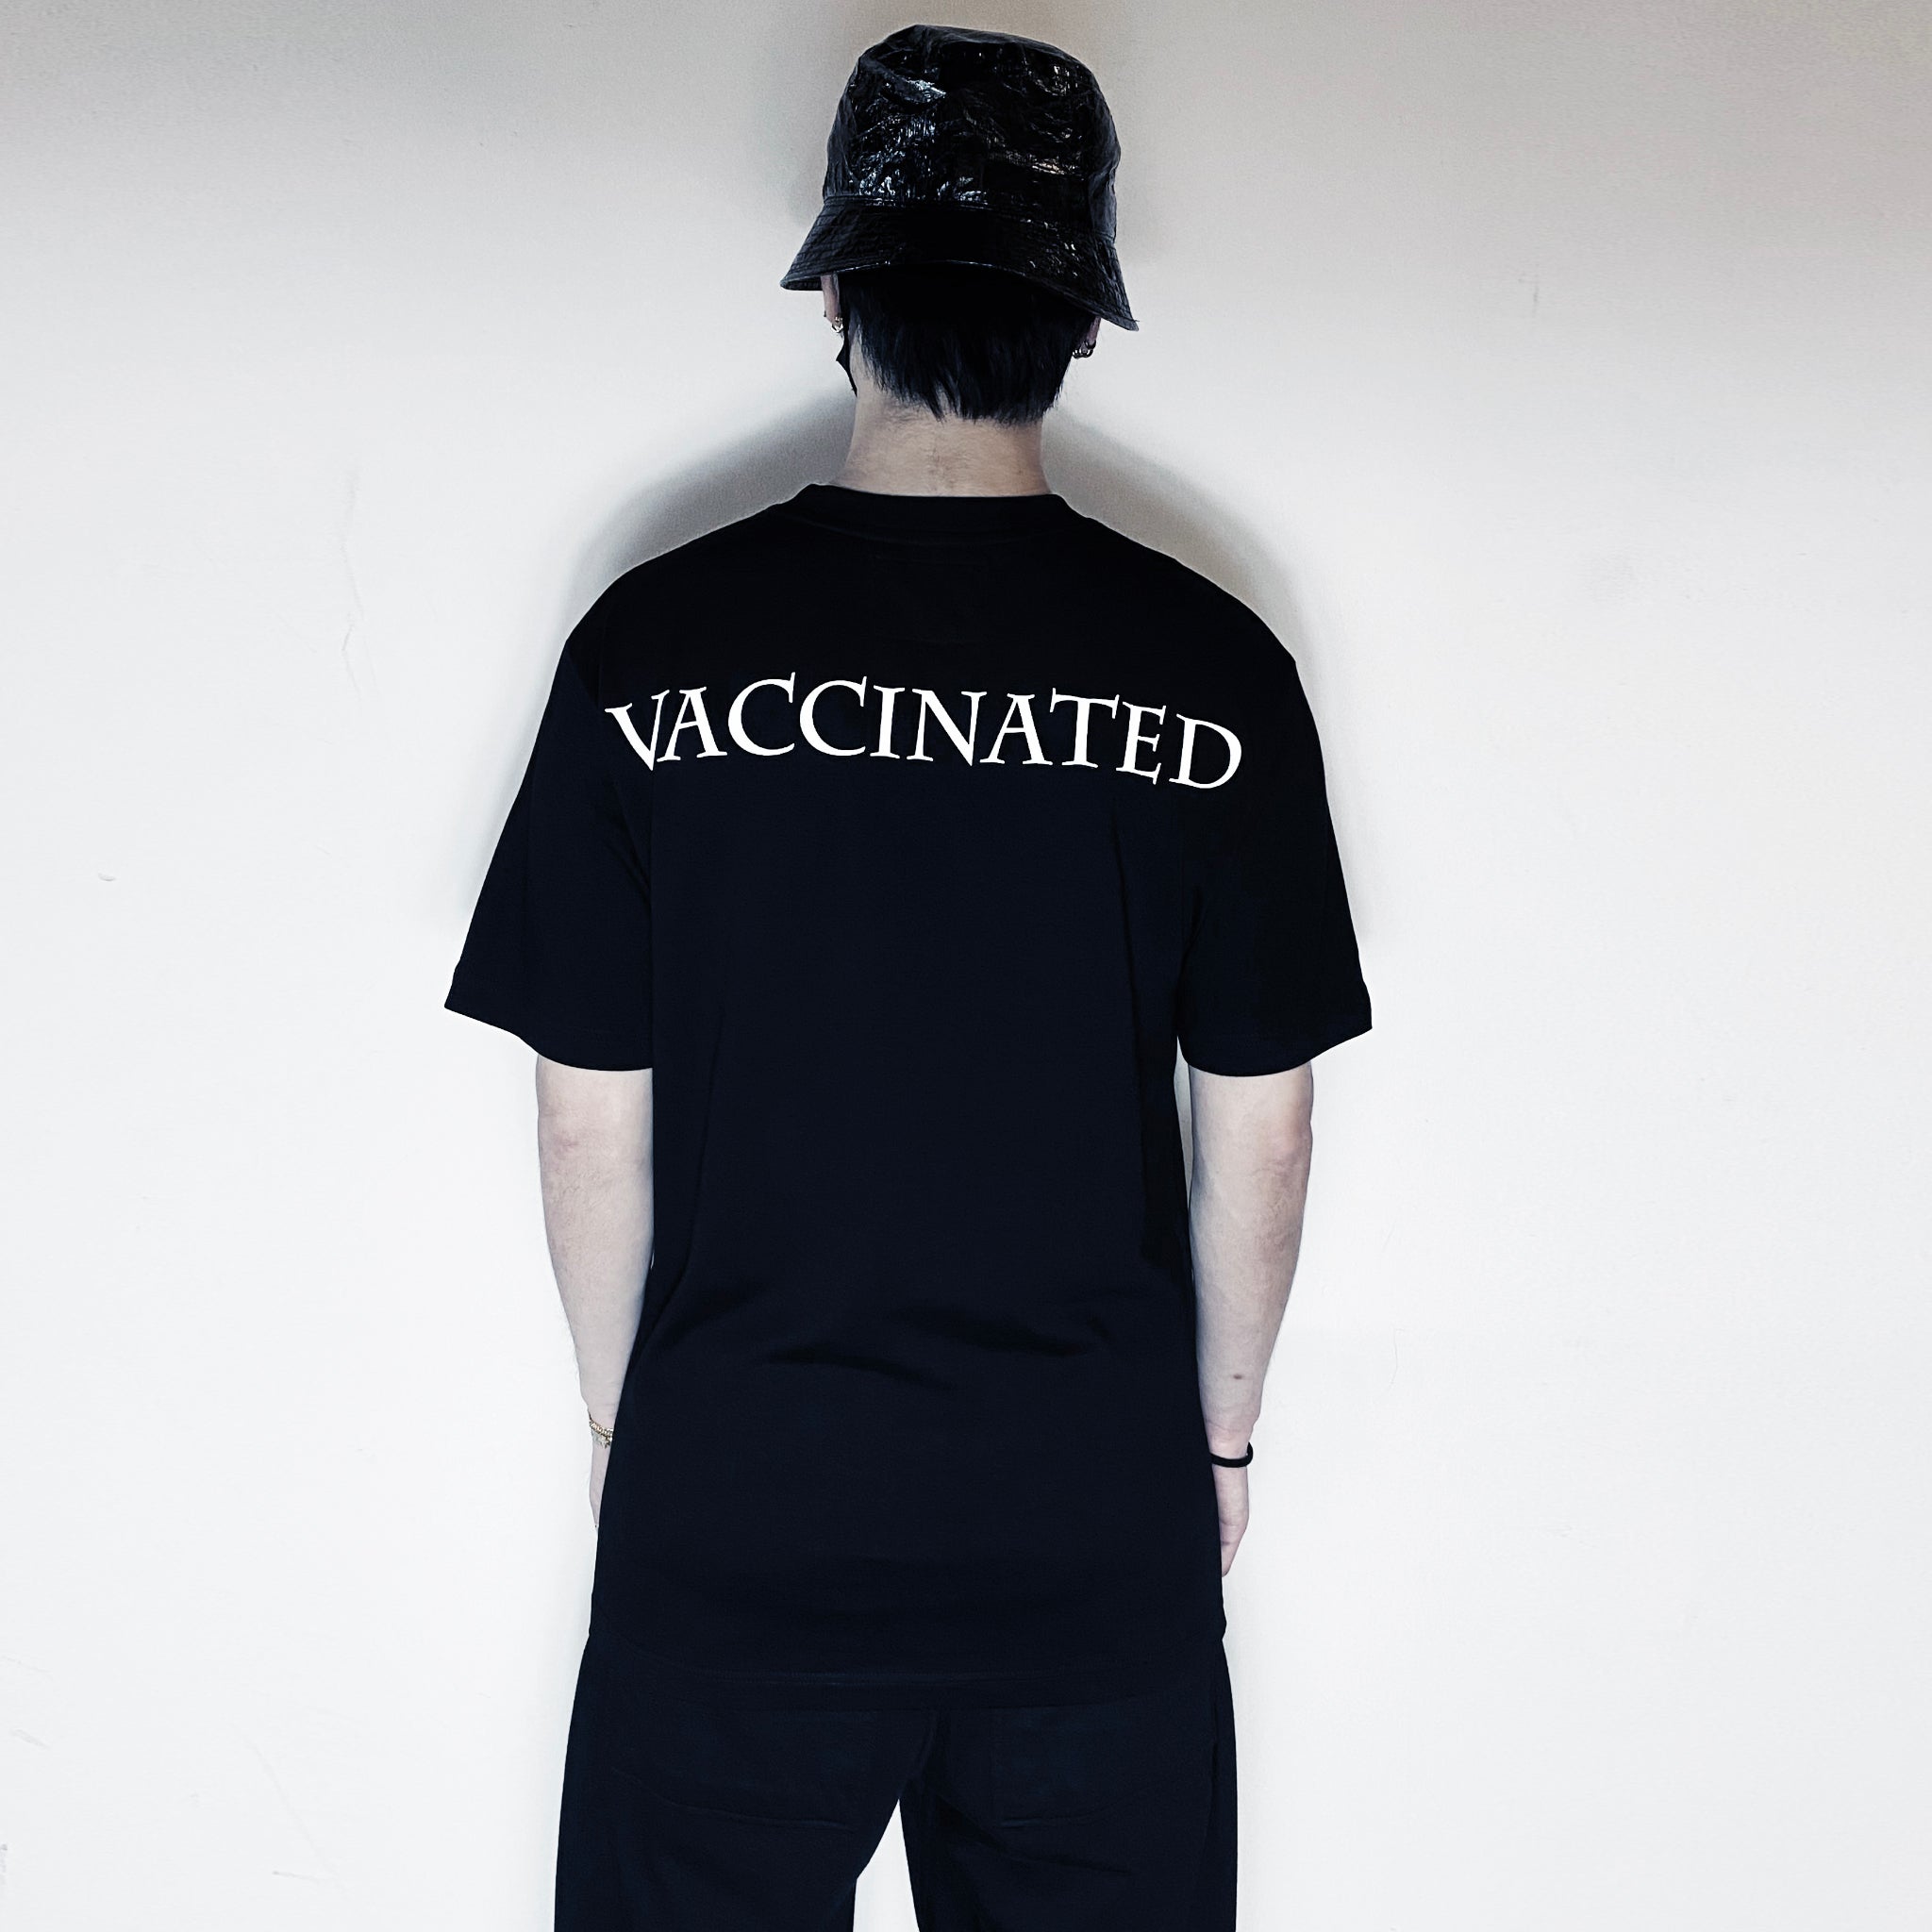 Vaccinated T-shirt